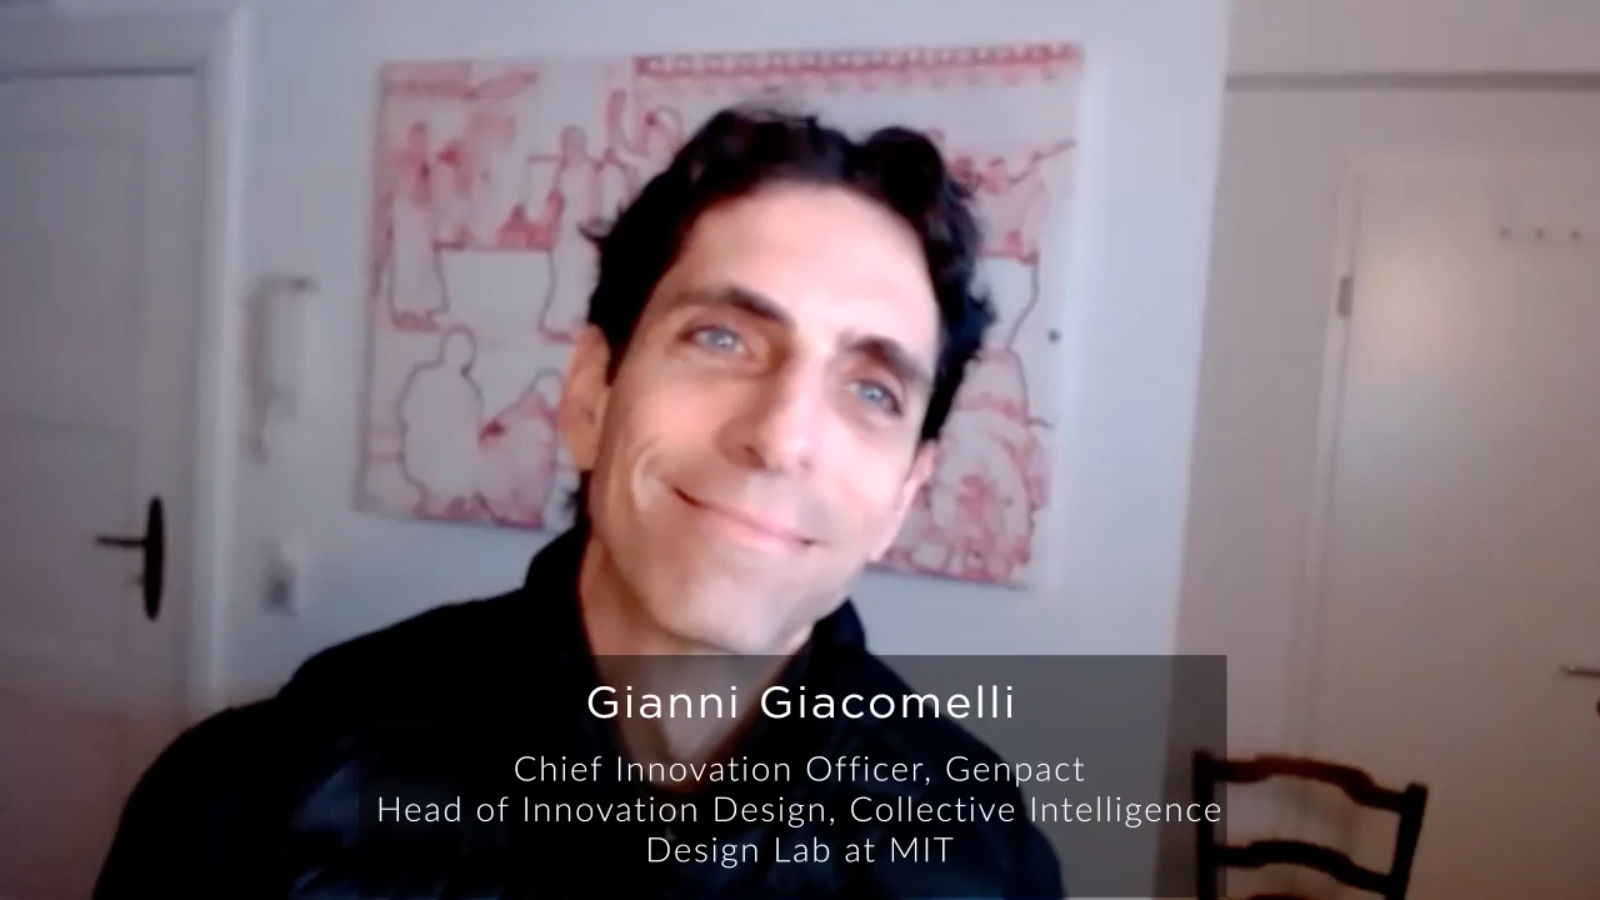 Gianni Giacomelli on Collective Intelligence